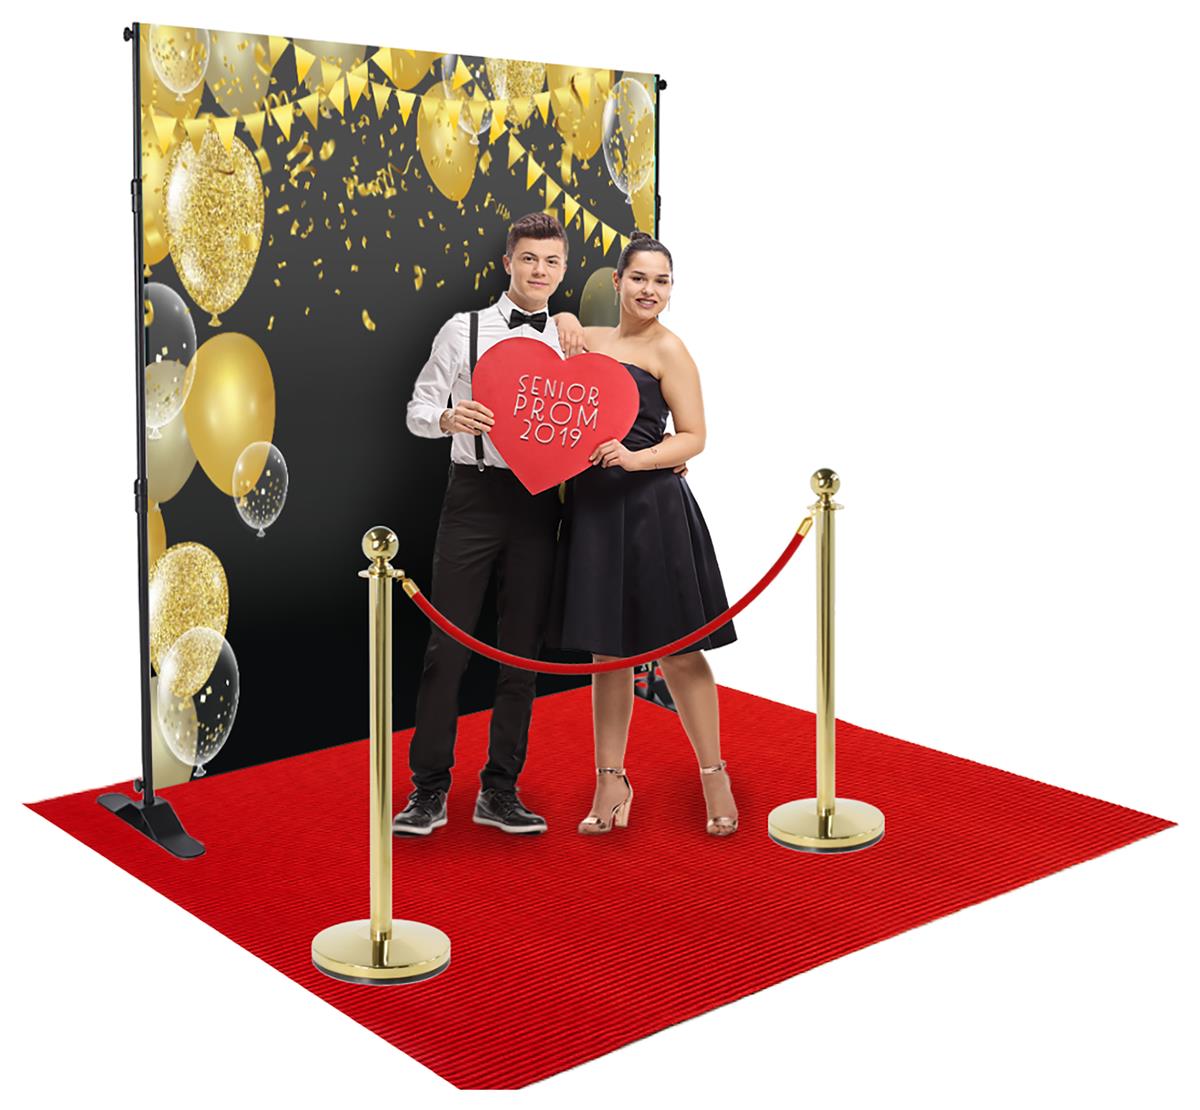 Hollywood Red Carpet 3' x 6' For Step Repeat display/Backdrop Floor Runner